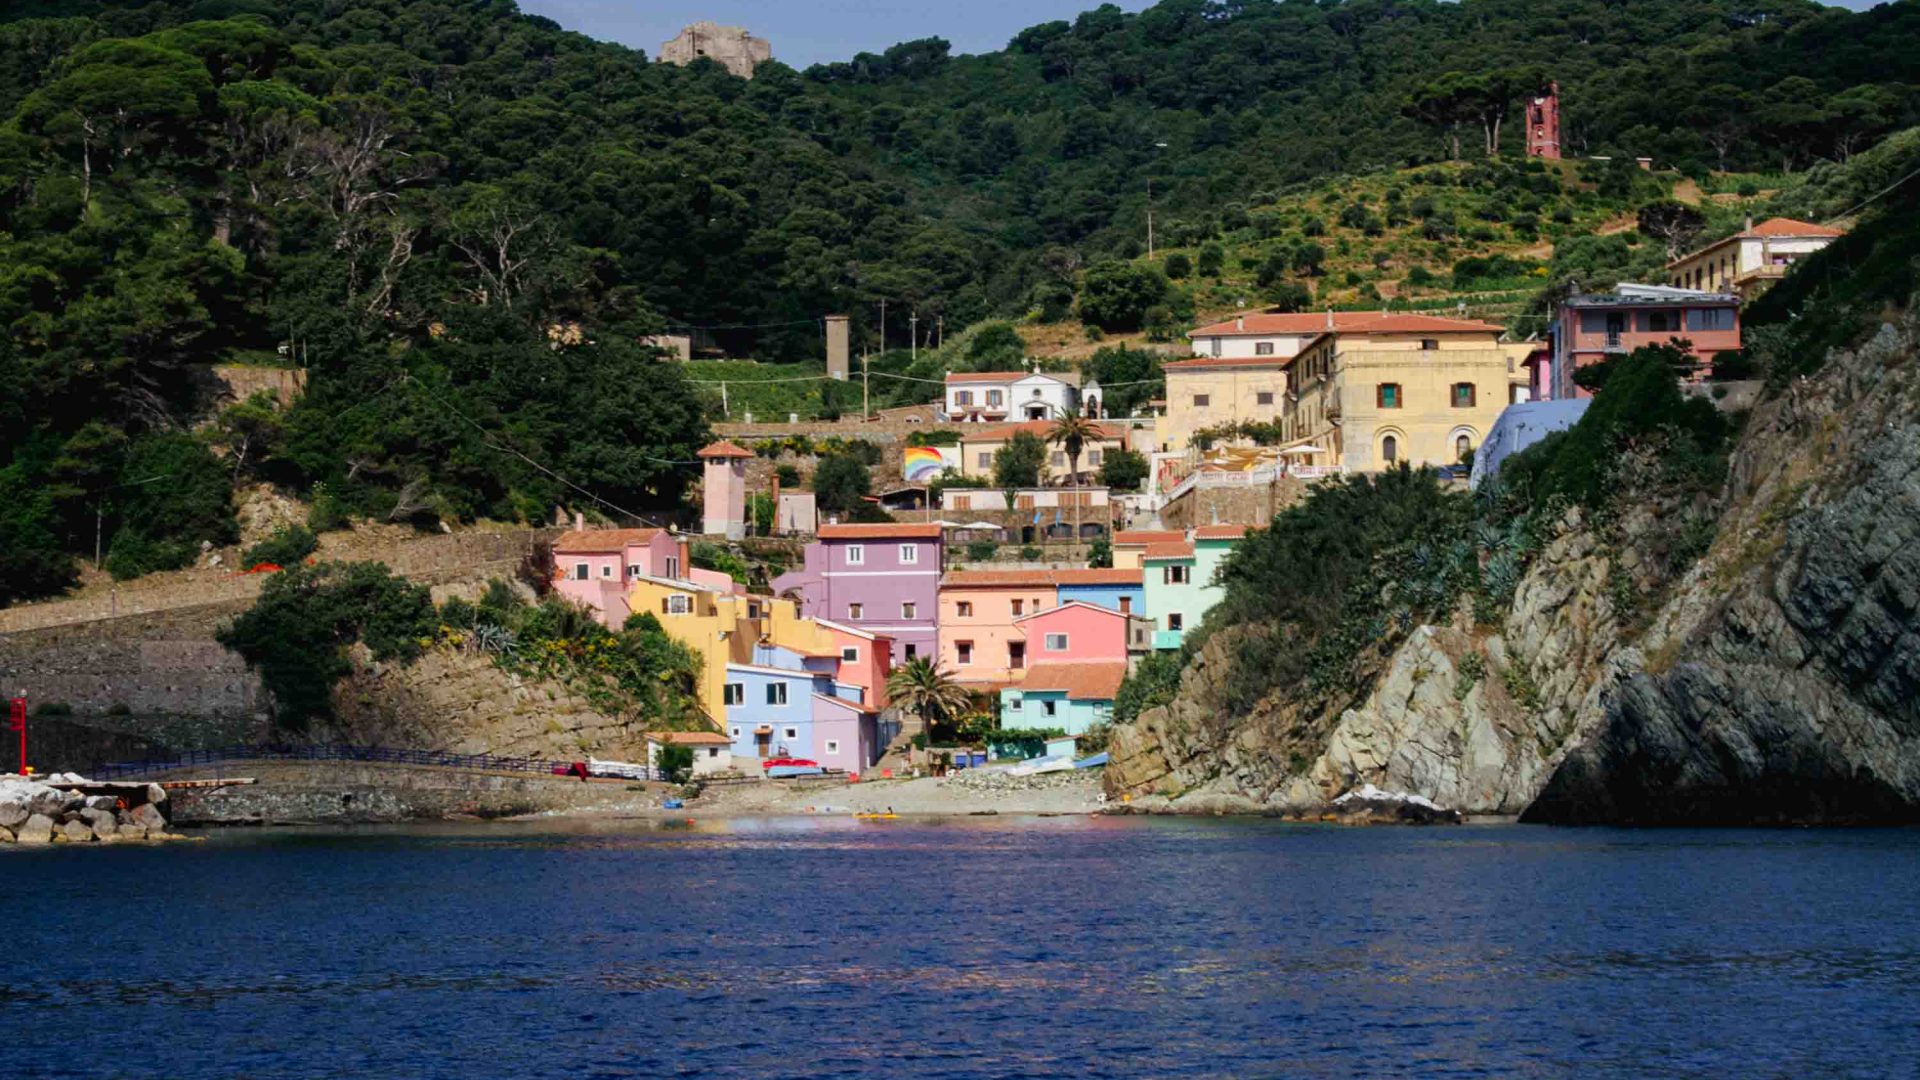 On this Tuscan prison island, inmates are taught to make world-class wine